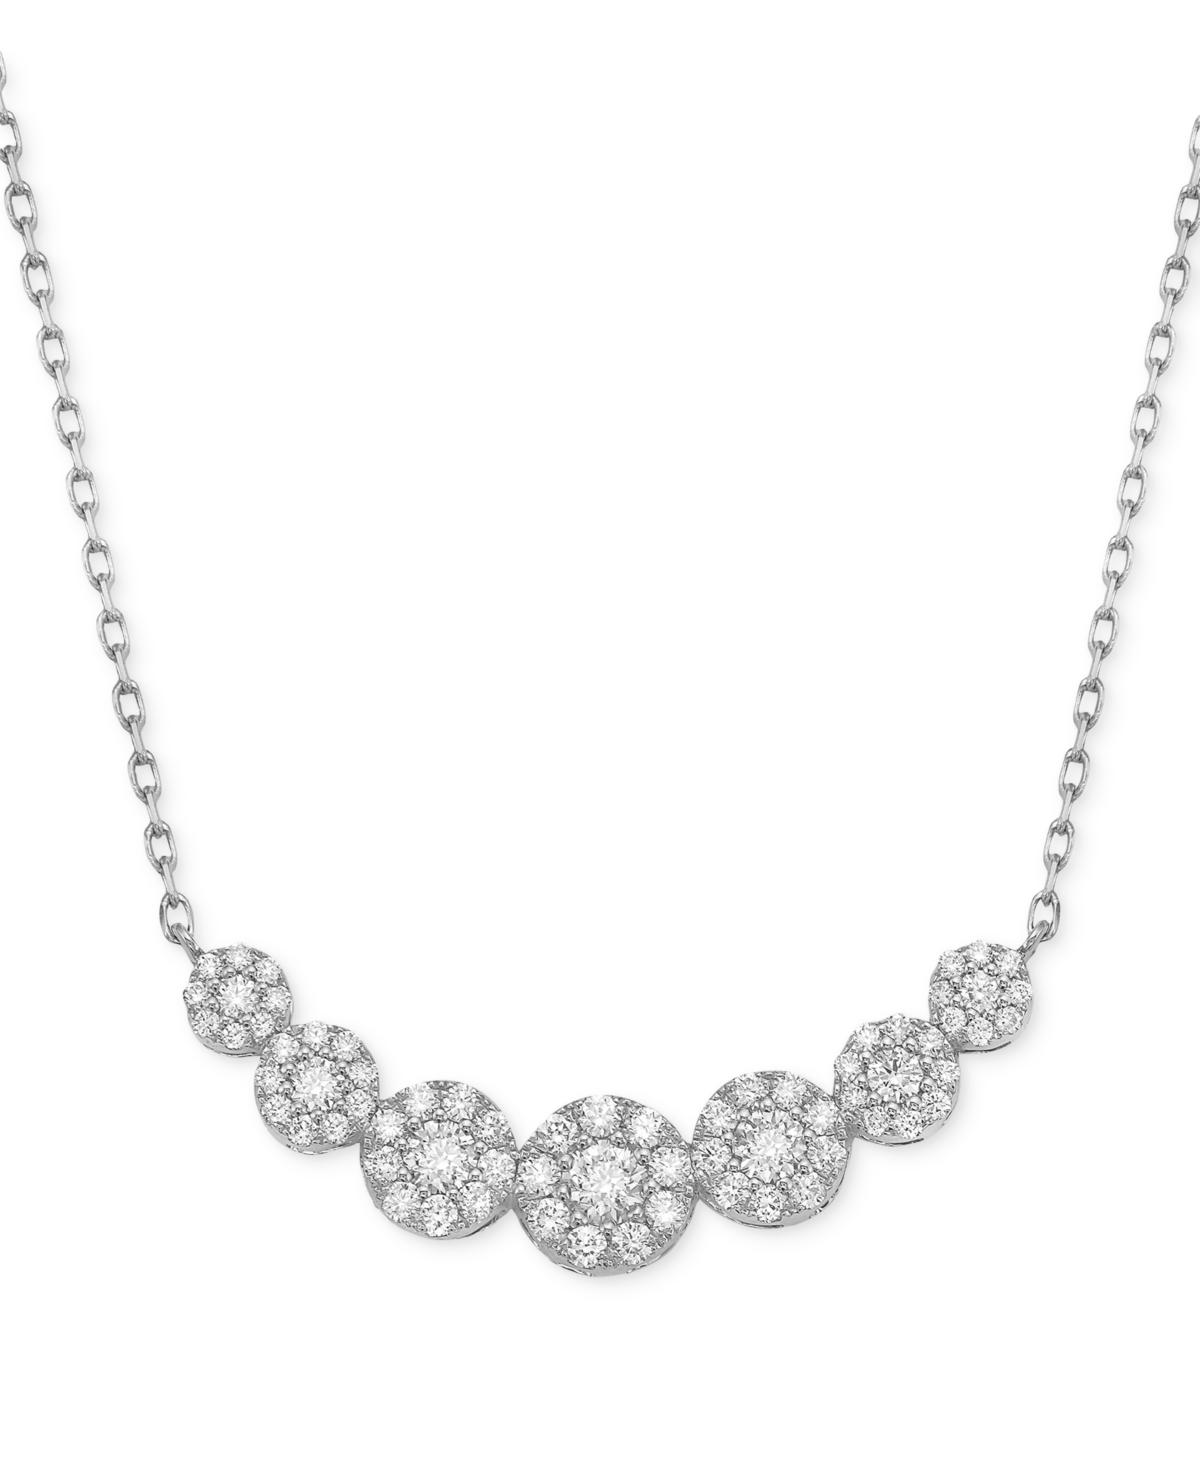 Macy's Diamond Multi Halo Collar Necklace (3/4 Ct. T.w.) , 16" + 2" Extender In White Gold